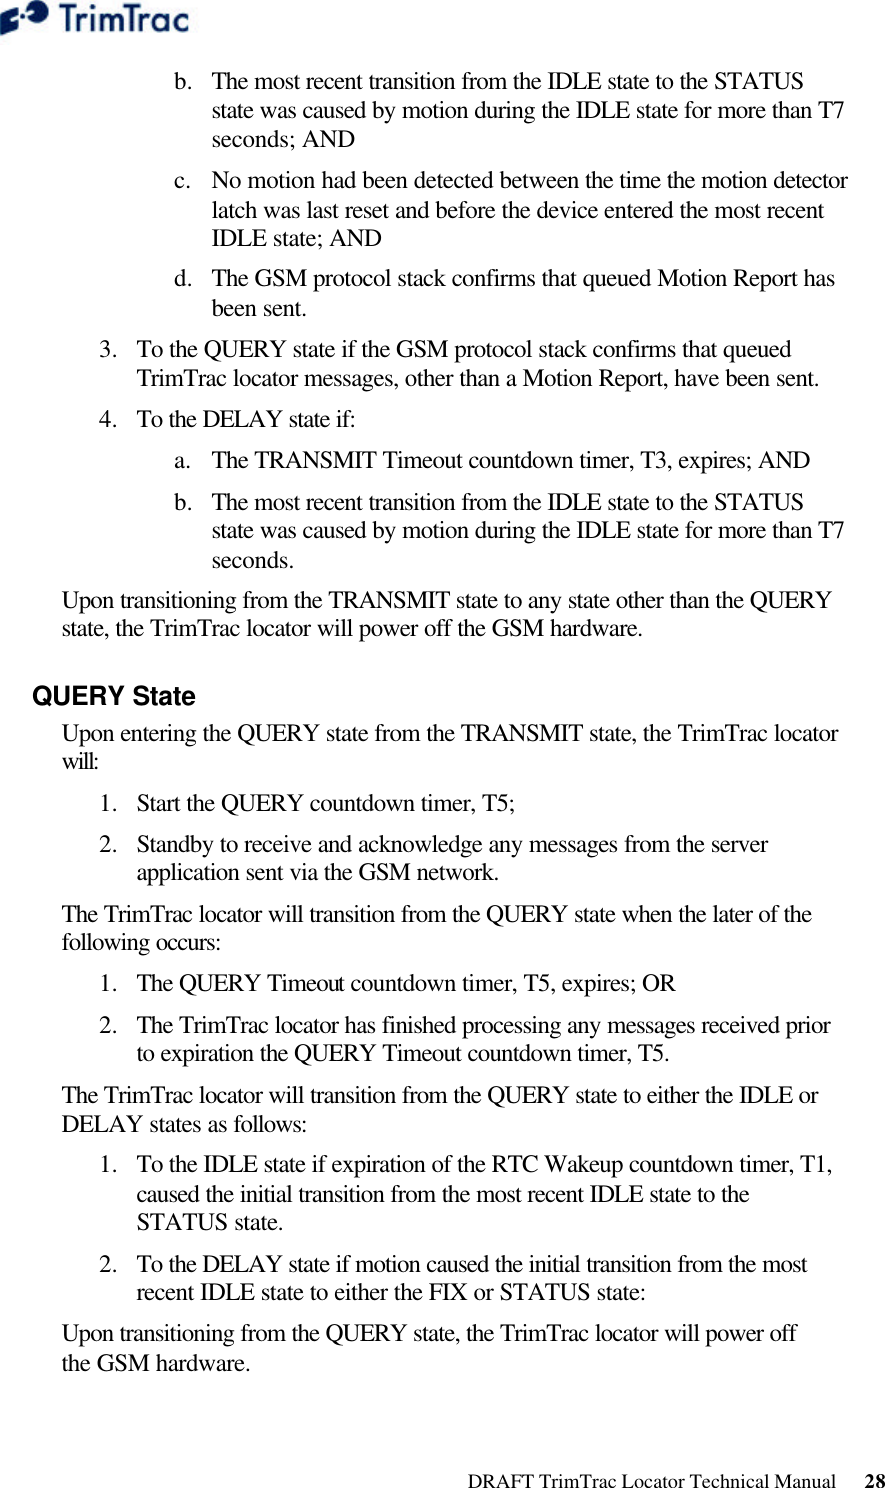  DRAFT TrimTrac Locator Technical Manual      28 b.  The most recent transition from the IDLE state to the STATUS state was caused by motion during the IDLE state for more than T7 seconds; AND c. No motion had been detected between the time the motion detector latch was last reset and before the device entered the most recent IDLE state; AND d.  The GSM protocol stack confirms that queued Motion Report has been sent. 3.  To the QUERY state if the GSM protocol stack confirms that queued TrimTrac locator messages, other than a Motion Report, have been sent. 4.  To the DELAY state if: a. The TRANSMIT Timeout countdown timer, T3, expires; AND b.  The most recent transition from the IDLE state to the STATUS state was caused by motion during the IDLE state for more than T7 seconds. Upon transitioning from the TRANSMIT state to any state other than the QUERY state, the TrimTrac locator will power off the GSM hardware. QUERY State Upon entering the QUERY state from the TRANSMIT state, the TrimTrac locator will: 1.  Start the QUERY countdown timer, T5; 2.  Standby to receive and acknowledge any messages from the server application sent via the GSM network. The TrimTrac locator will transition from the QUERY state when the later of the following occurs: 1.  The QUERY Timeout countdown timer, T5, expires; OR 2.  The TrimTrac locator has finished processing any messages received prior to expiration the QUERY Timeout countdown timer, T5. The TrimTrac locator will transition from the QUERY state to either the IDLE or DELAY states as follows: 1.  To the IDLE state if expiration of the RTC Wakeup countdown timer, T1, caused the initial transition from the most recent IDLE state to the STATUS state. 2.  To the DELAY state if motion caused the initial transition from the most recent IDLE state to either the FIX or STATUS state: Upon transitioning from the QUERY state, the TrimTrac locator will power off the GSM hardware. 